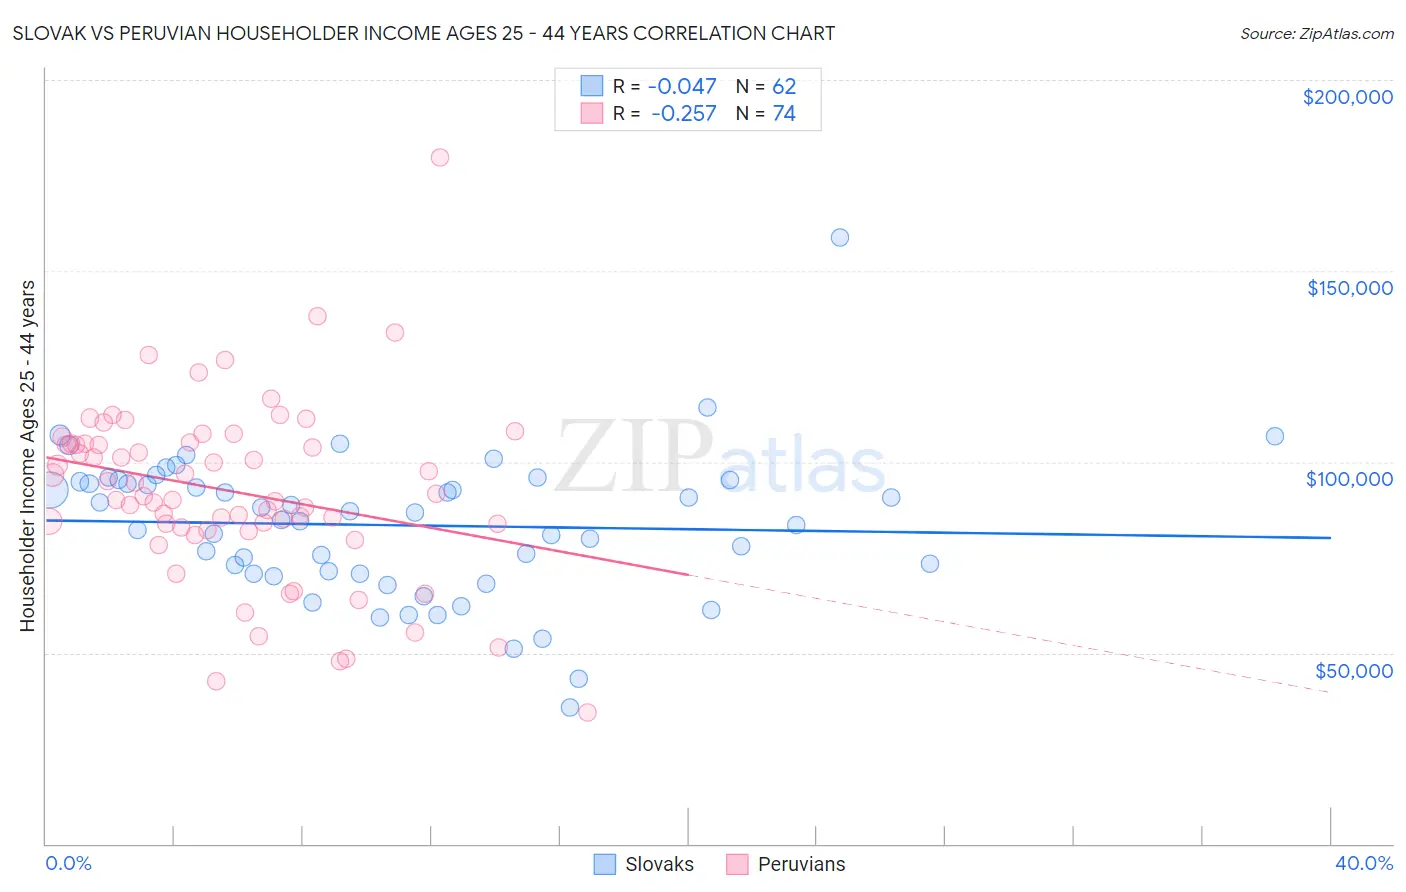 Slovak vs Peruvian Householder Income Ages 25 - 44 years